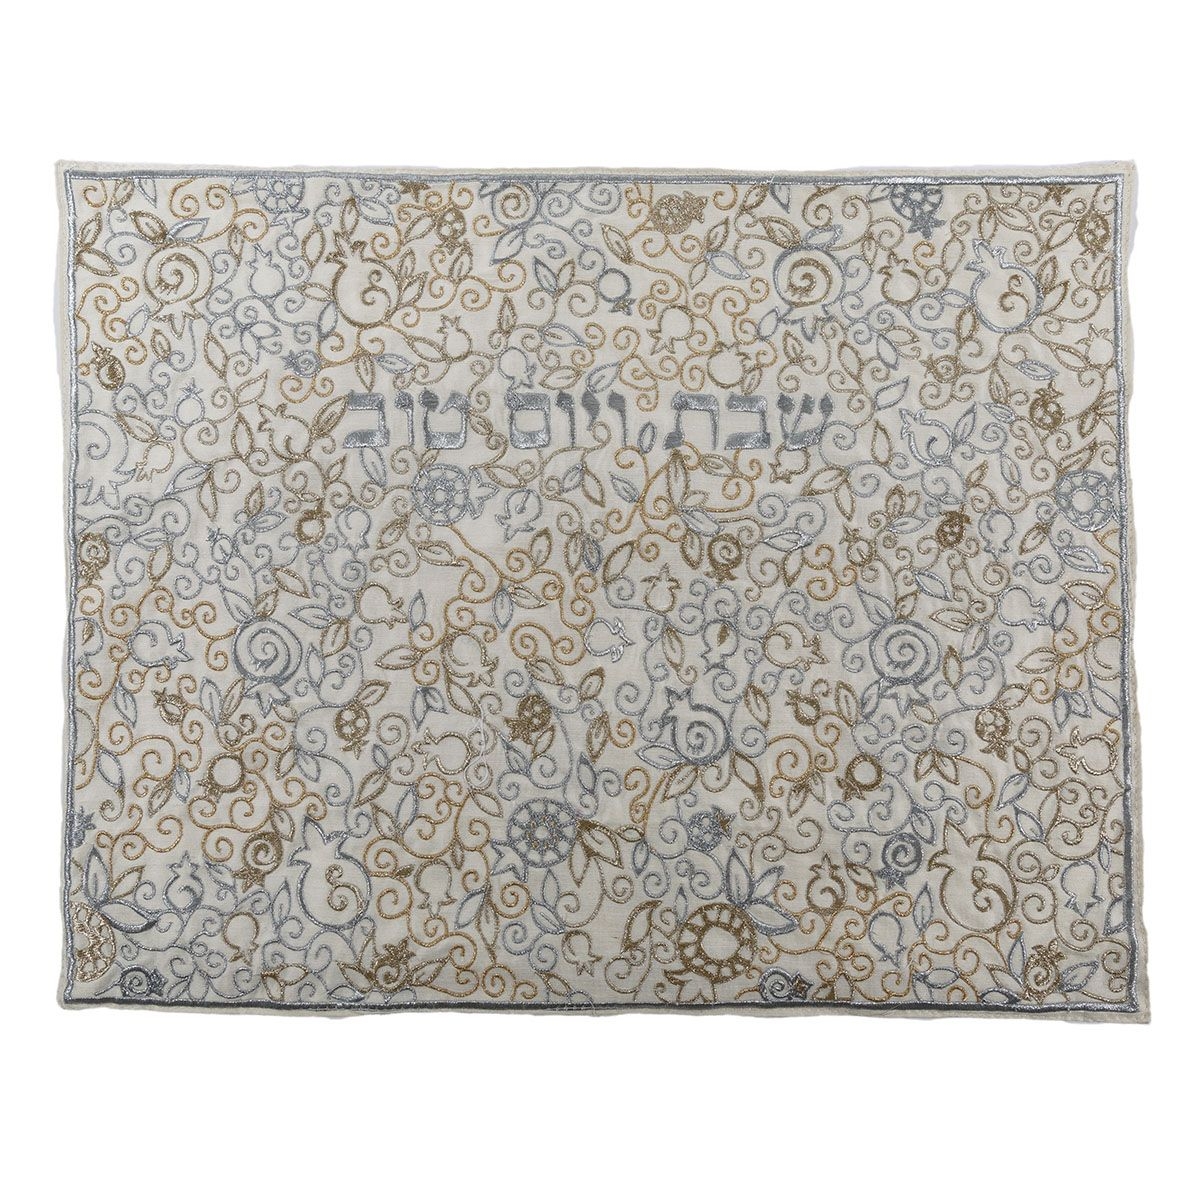 Yair Emanuel Embroidered Pomegranate Challah Cover – Variety of Colors - 1